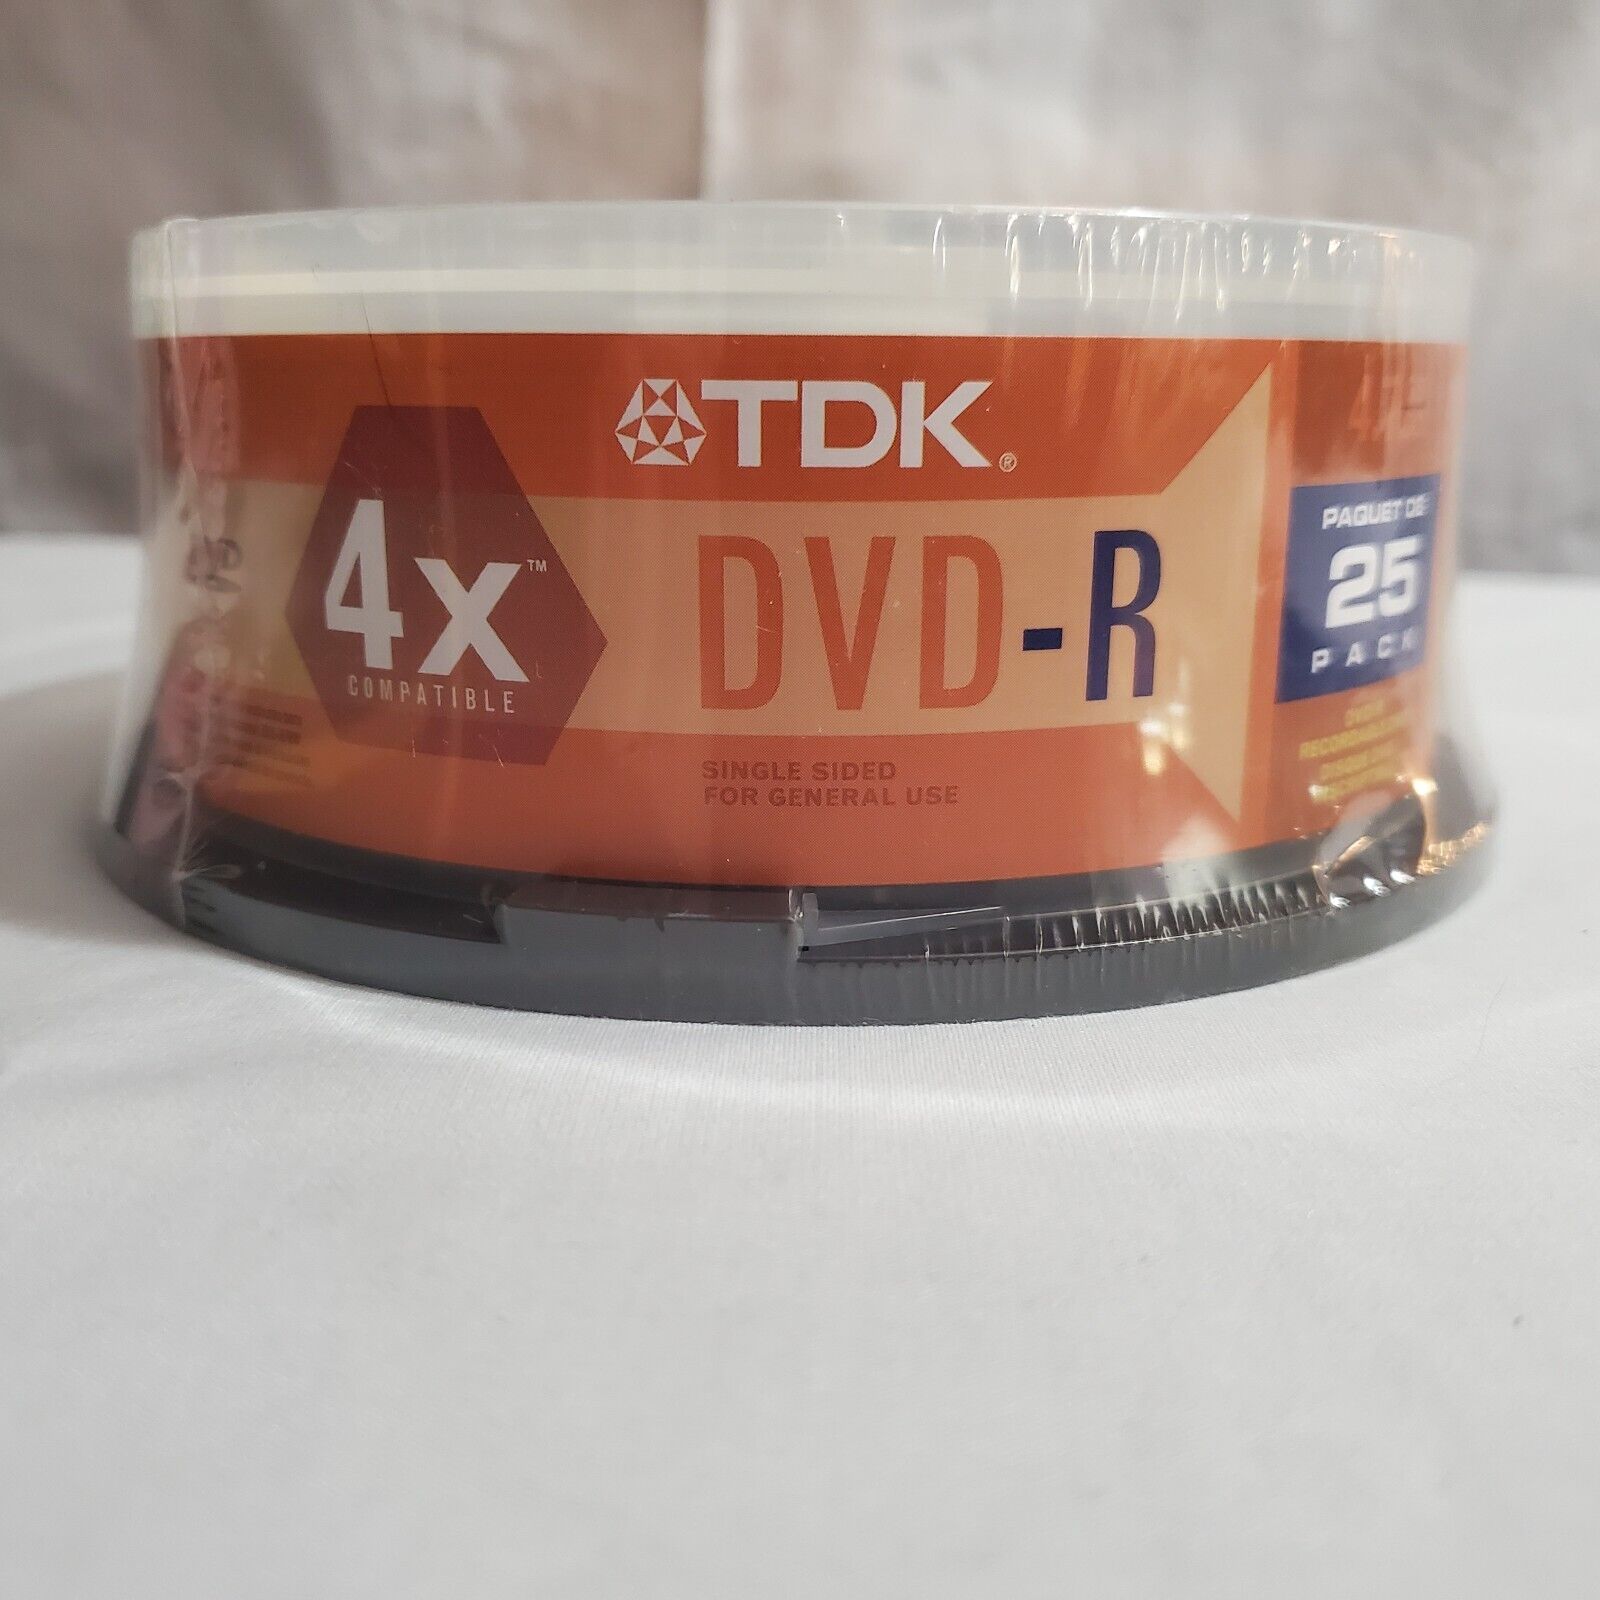 New Sealed TDK DVD-R 4x Compatible 25 Pack 120 Min Video 4.7GB Recordable DVD